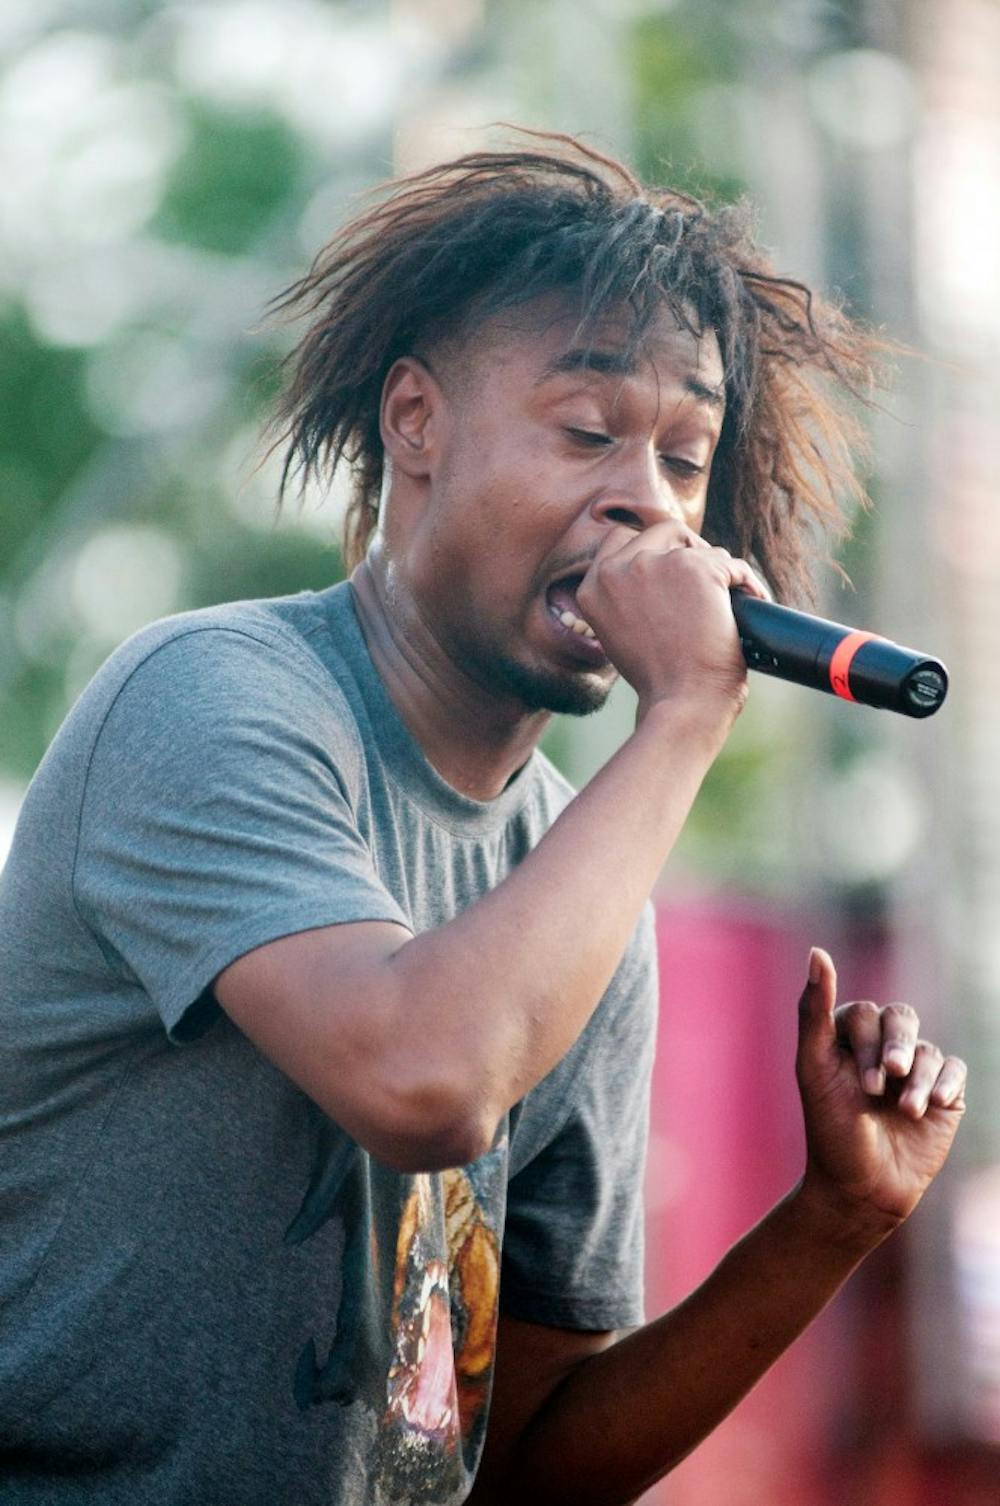 Danny Brown takes the stage Sunday evening, July 15, 2012 at the final day of Common Ground Music Festival in downtown Lansing.  This year marked the 13th annual festival. Adam Toolin/The State News